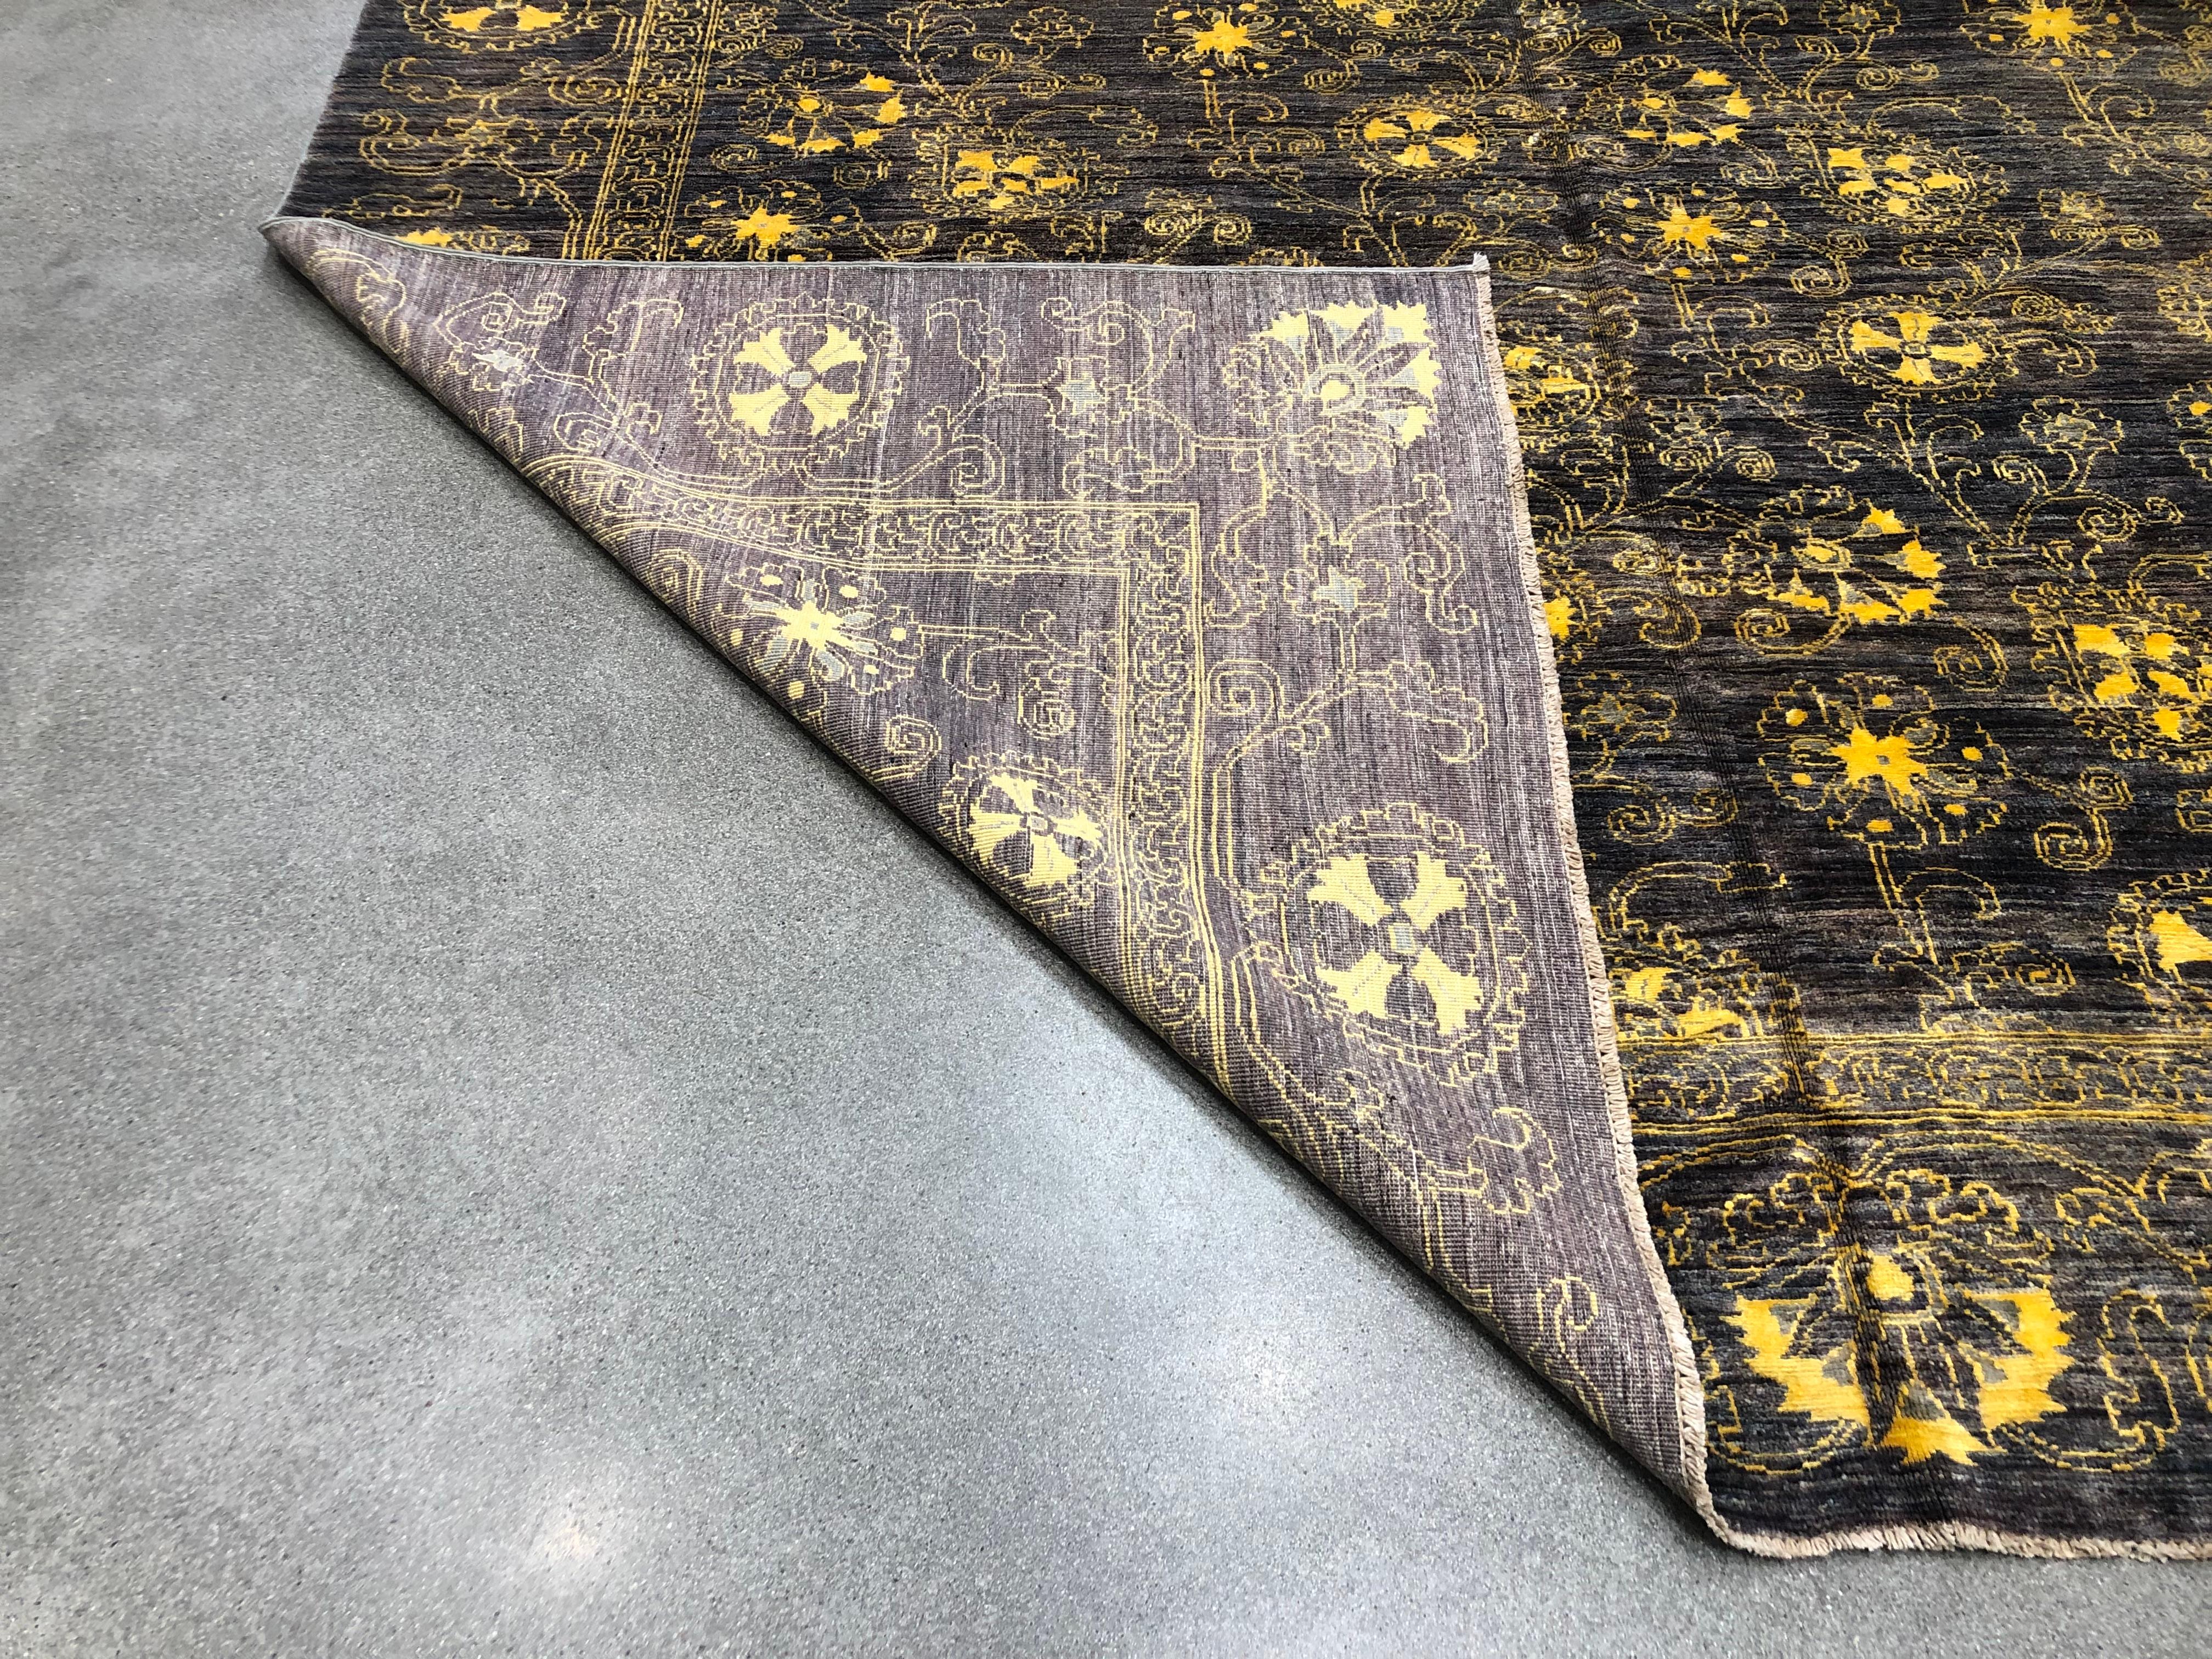 The colors of gold and eggplant with a combination of wool and silk materials make this rug a luscious and rich option for your space. This all over design rug with a border is handmade and hand knotted from Pakistan.